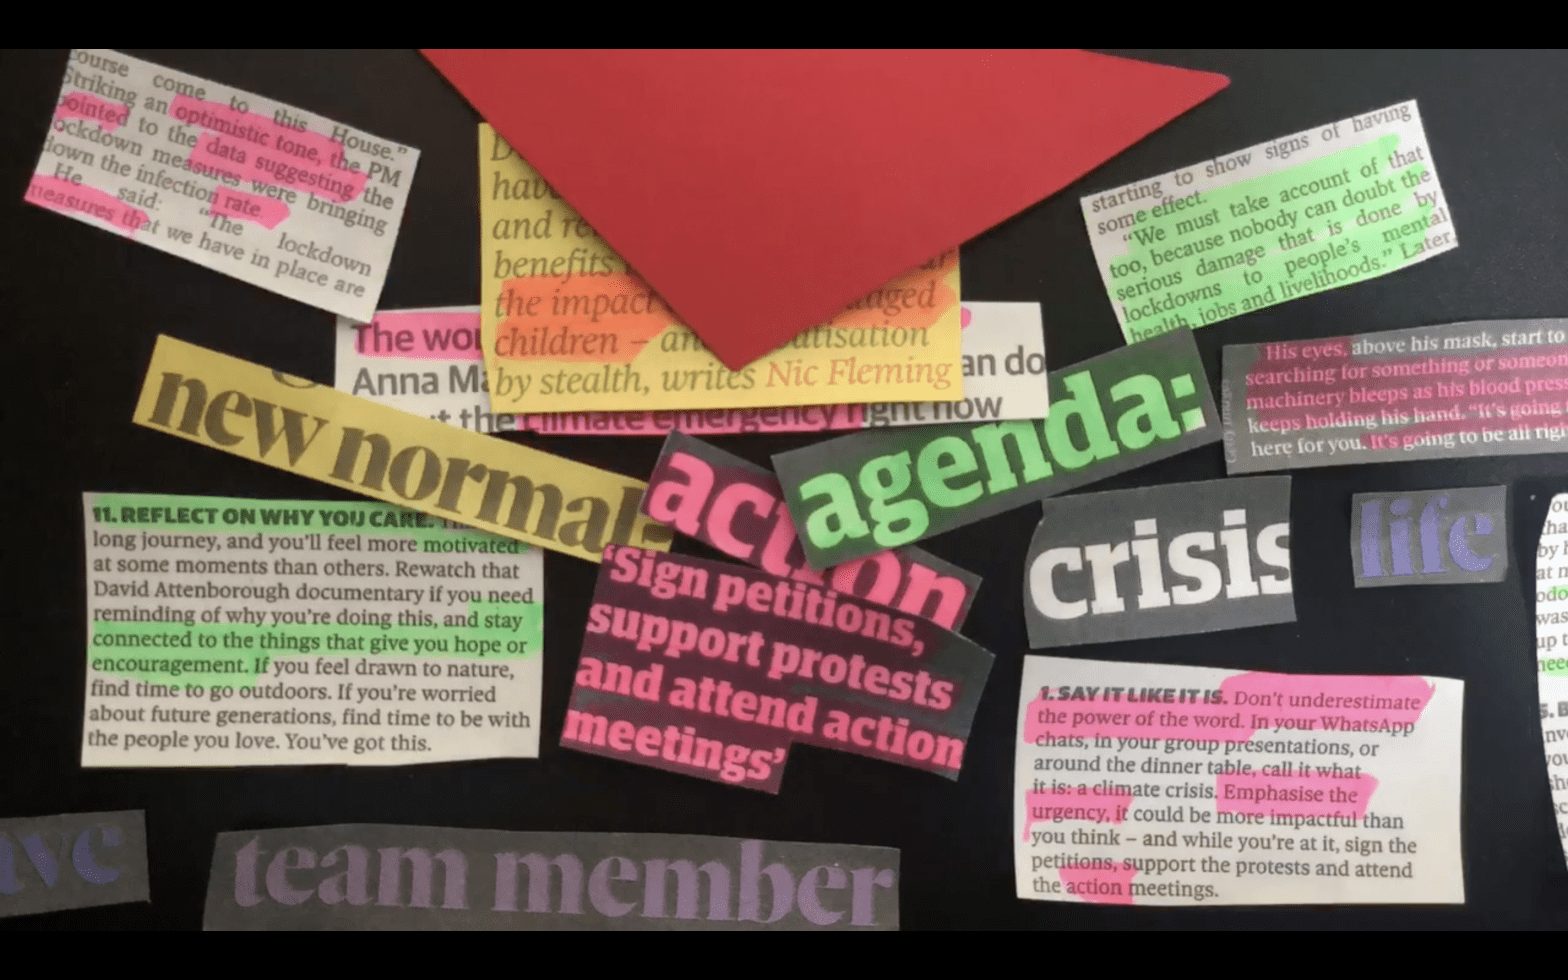 A collage of newspaper headlines and articles cut out and arranged next to each other on a black surface. The words 'normal?' 'agenda' 'action' 'crisis' 'sign petitions, support protests and attend action meetings' are highlighted in green pink and yellow.